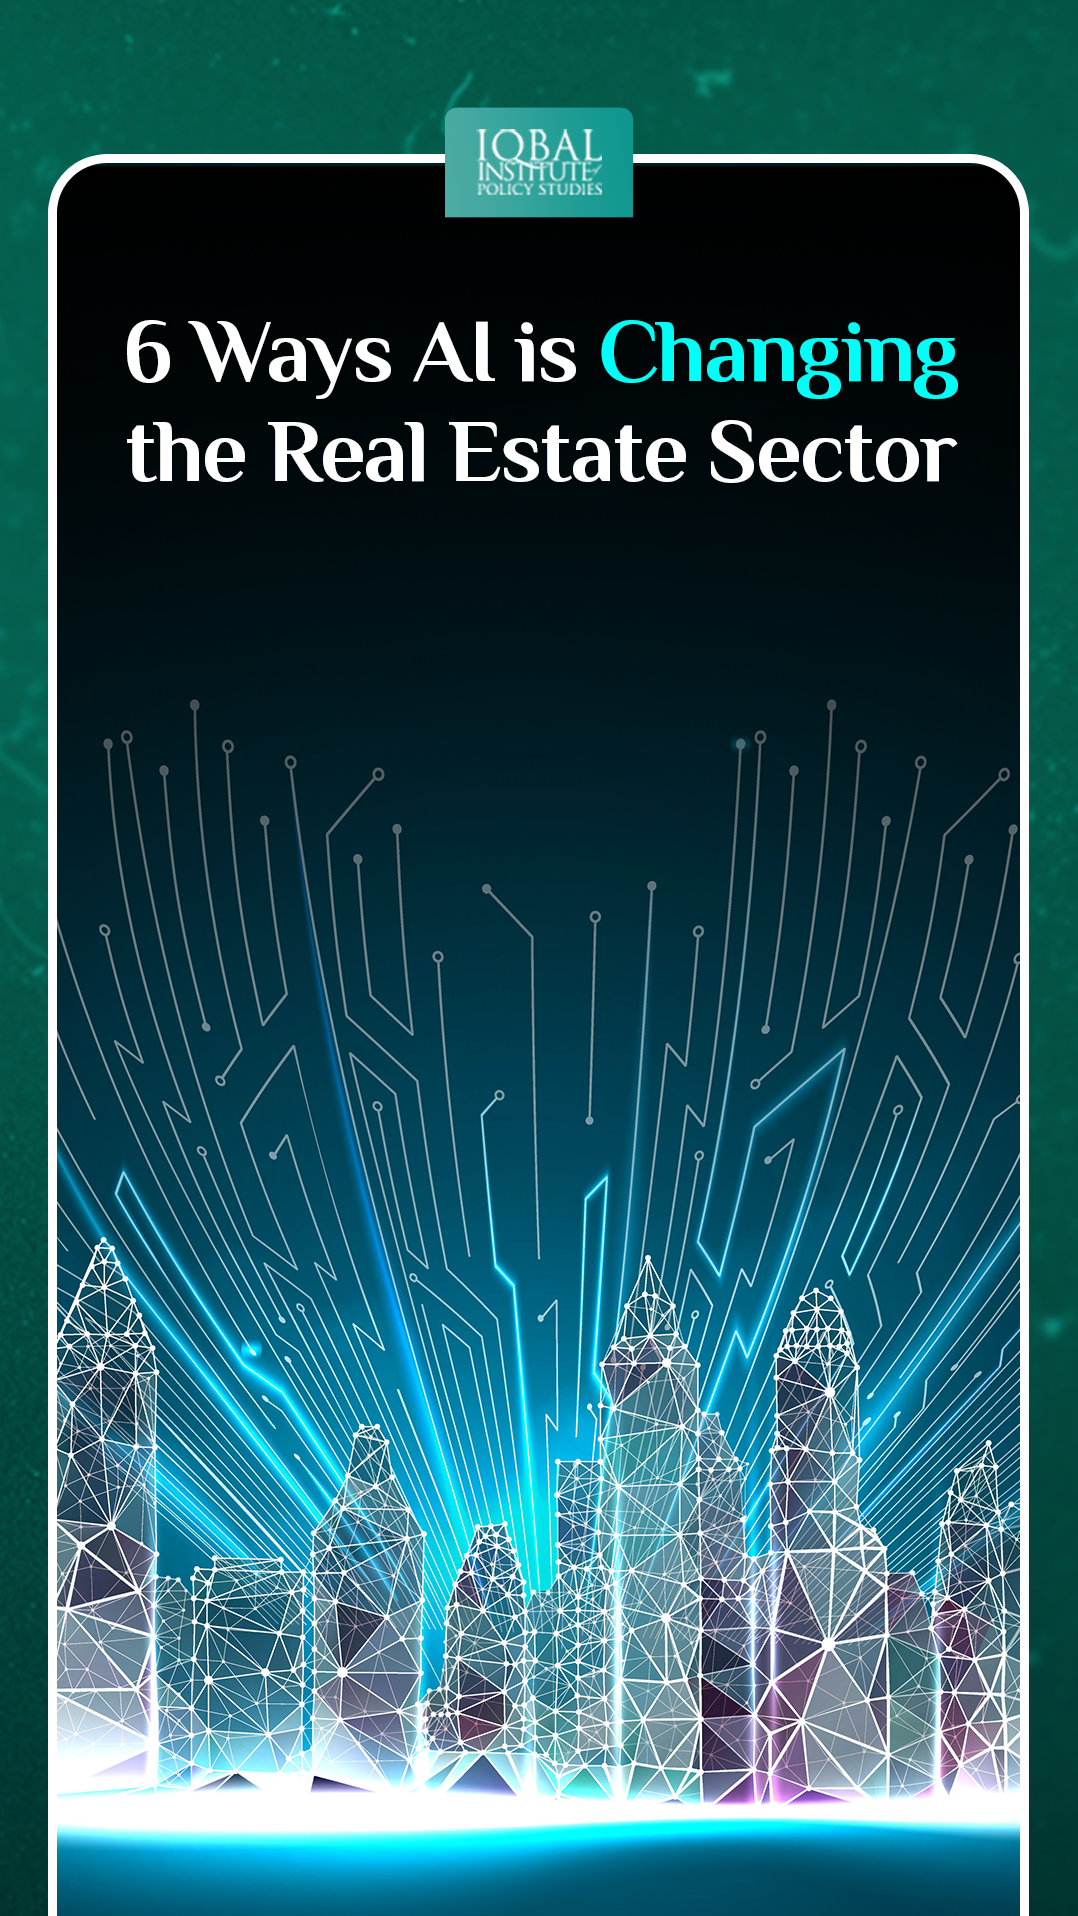 6 Ways AI is Changing the Real Estate Sector